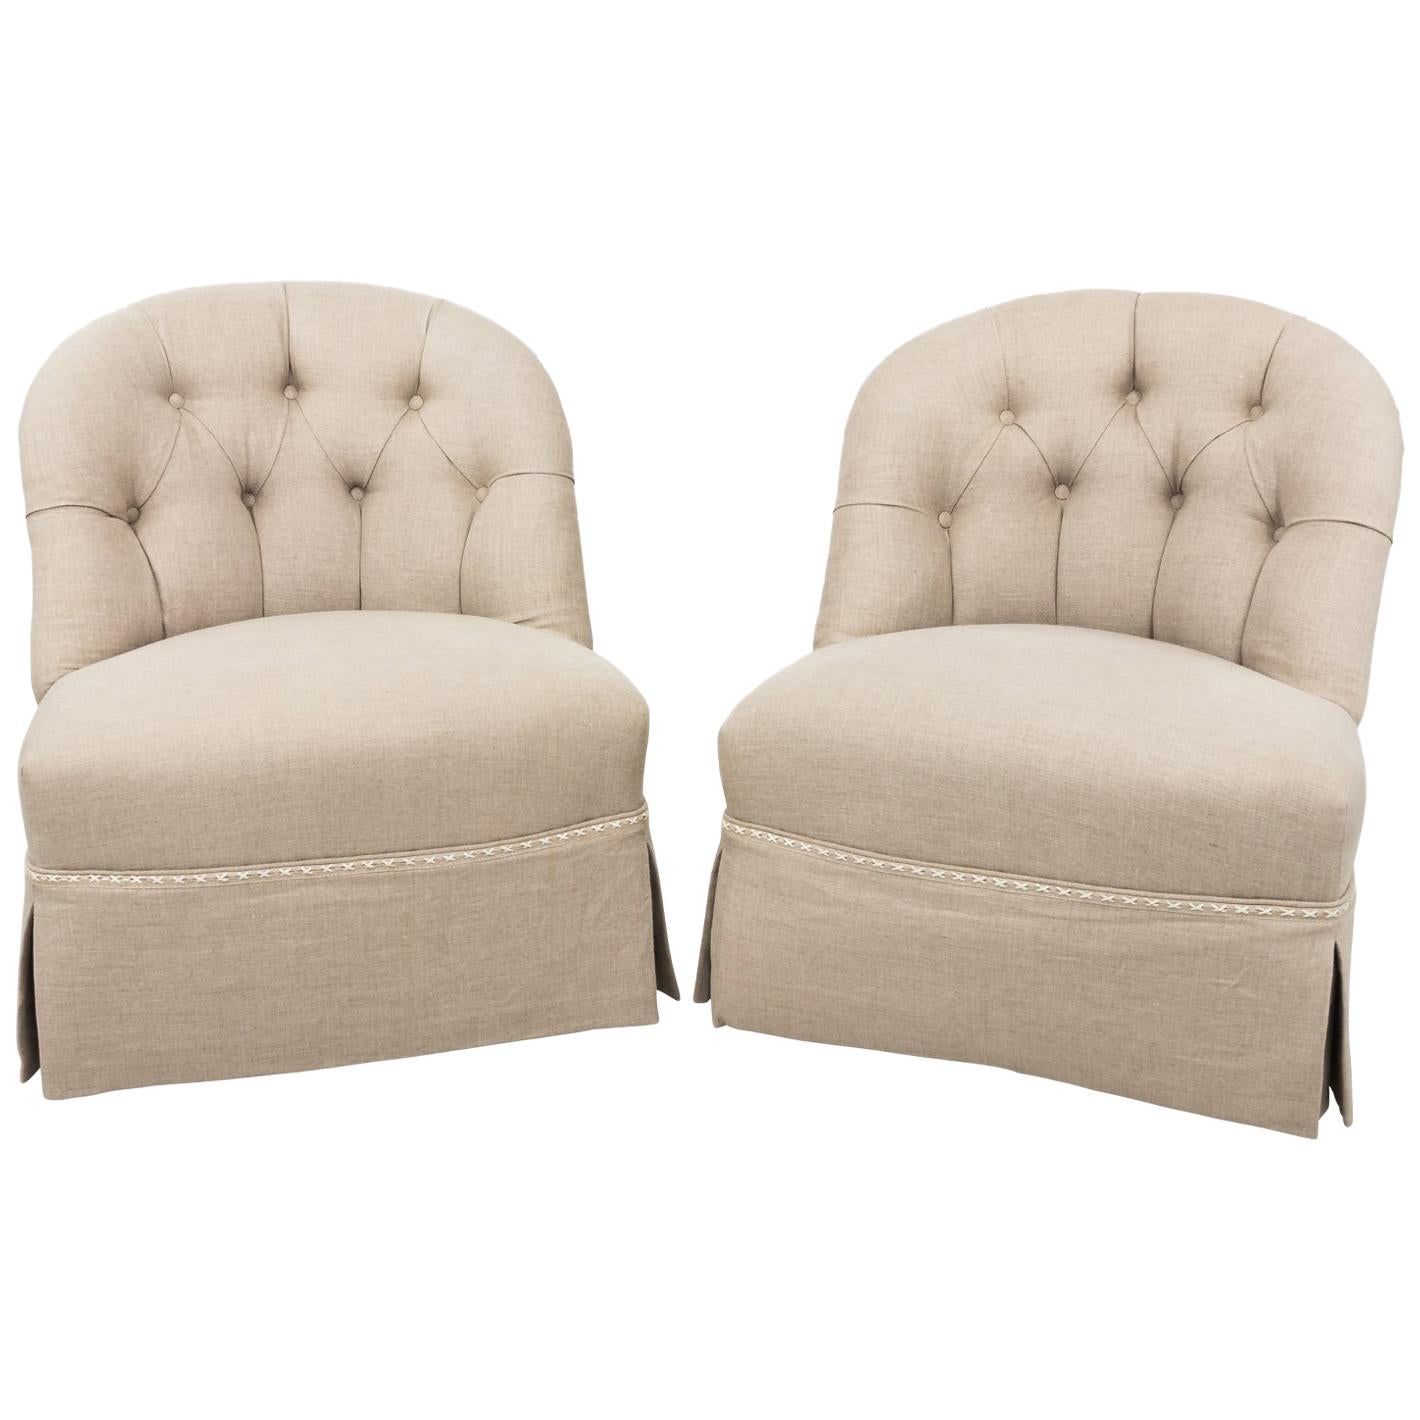 Pair of Tufted Linen Slipper Chairs